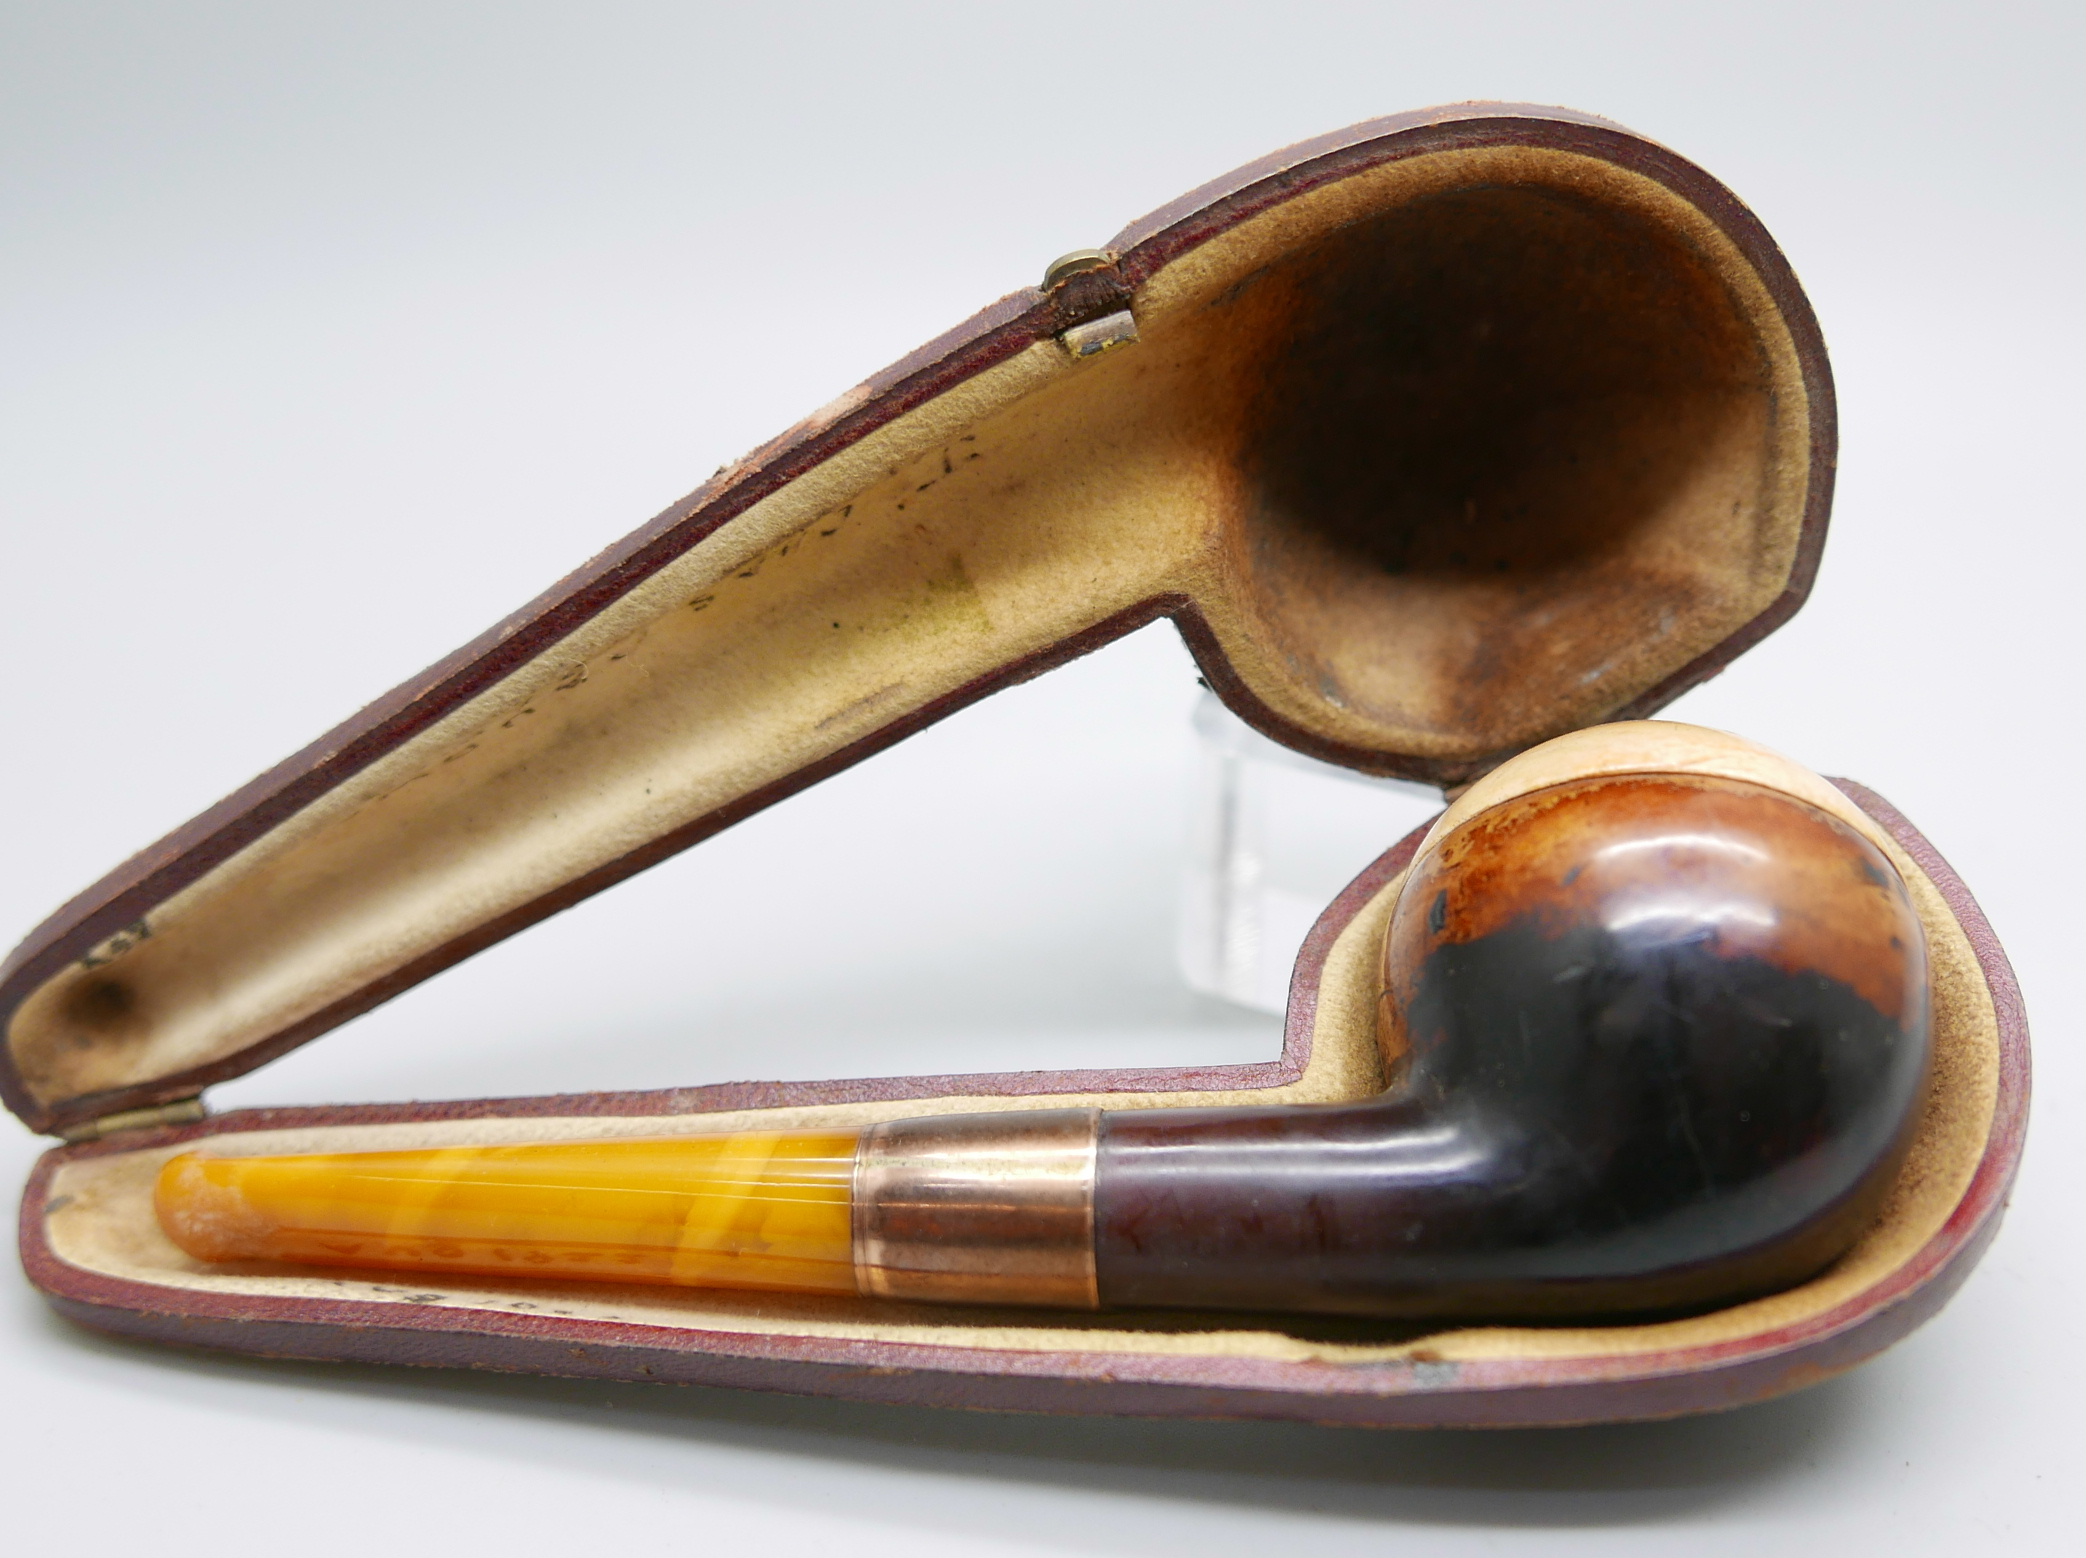 A smoker's pipe with a 9ct gold collar and a cigarette holder, both cased - Image 4 of 6